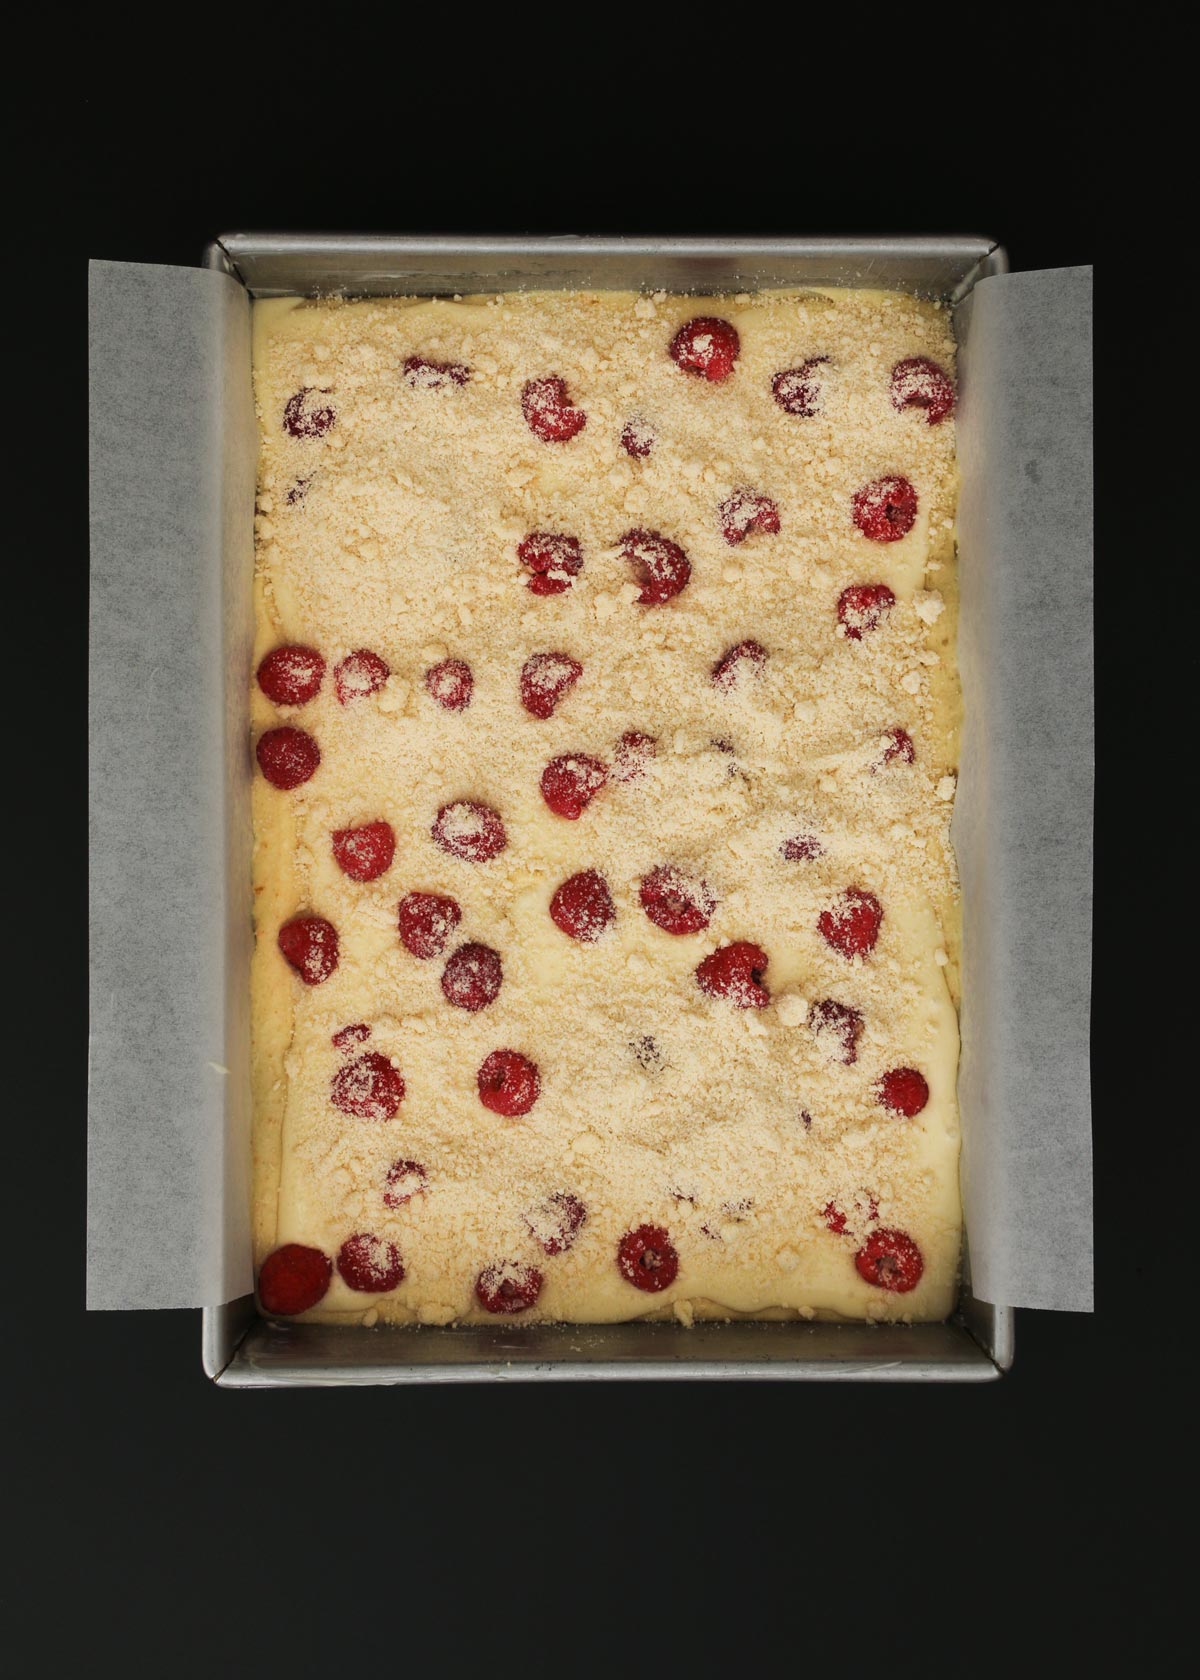 streusel topping sprinkled over raspberry layer.